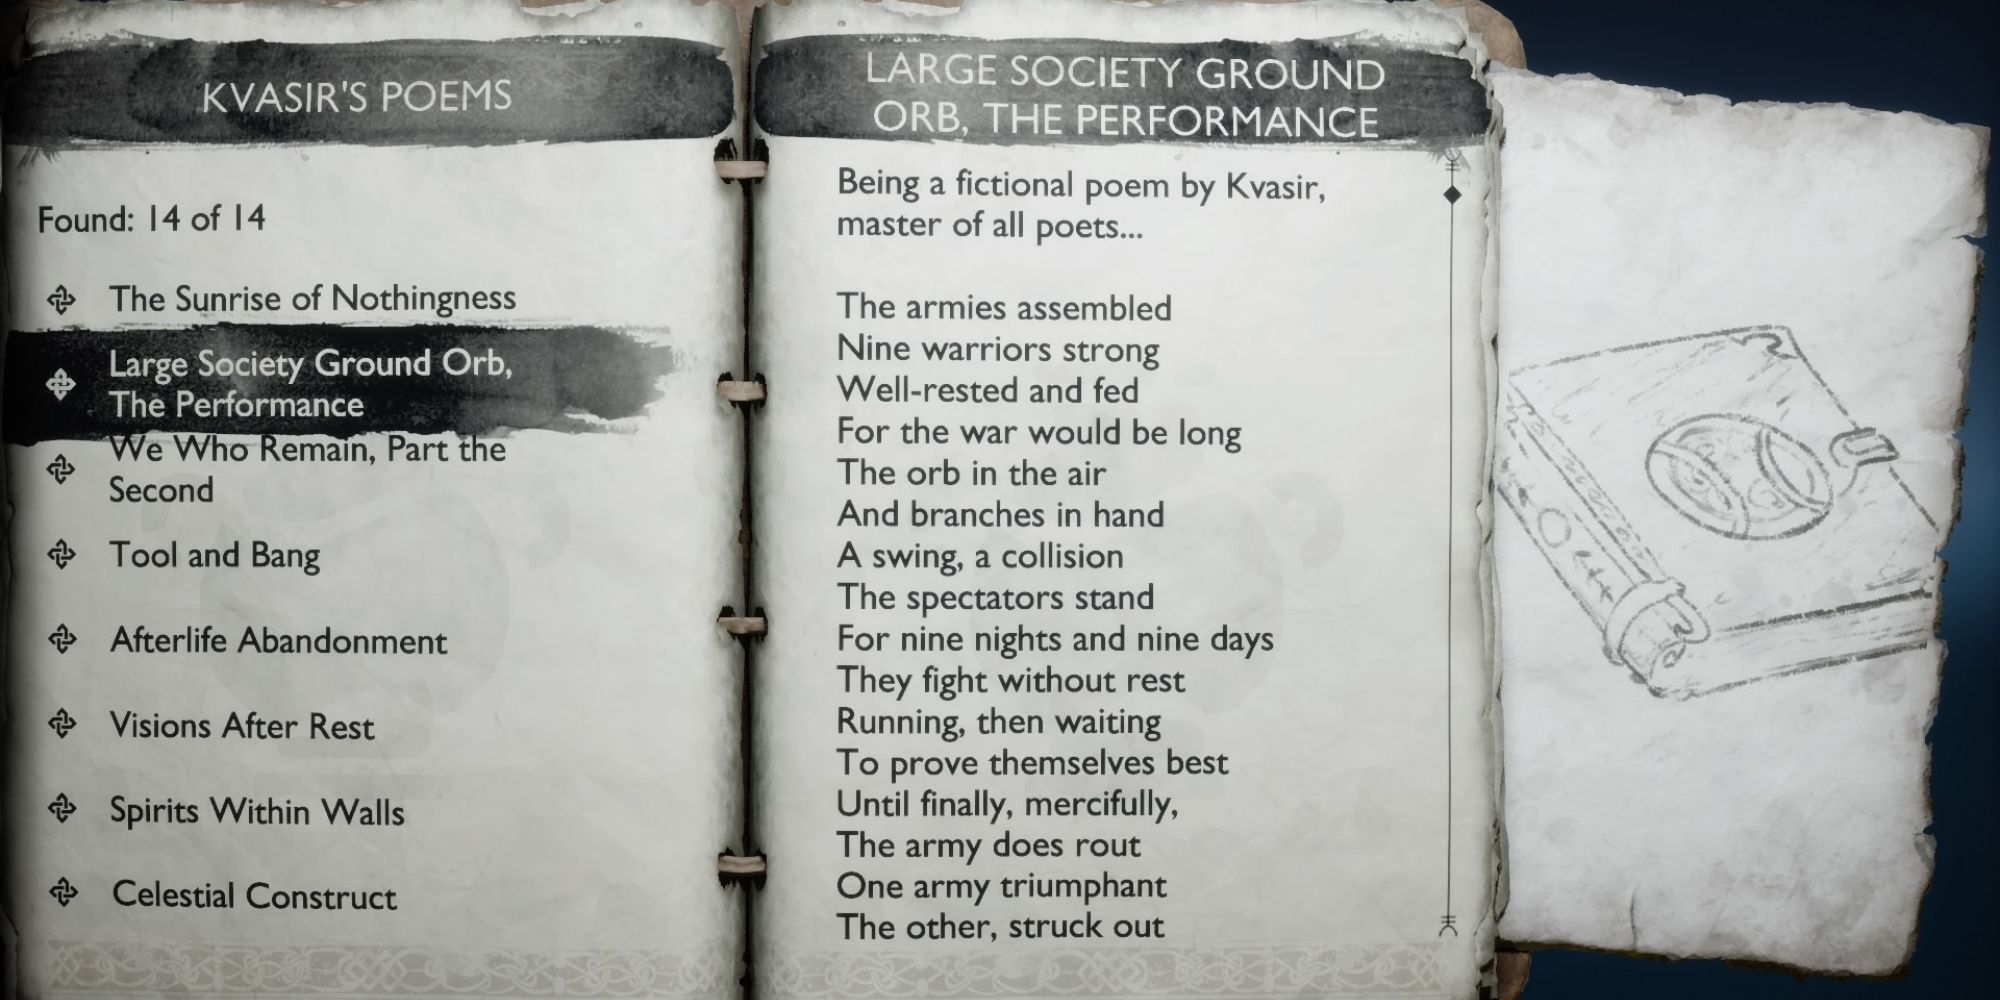 Krato's journal open to the page about Large Society Ground Orb, The Performance